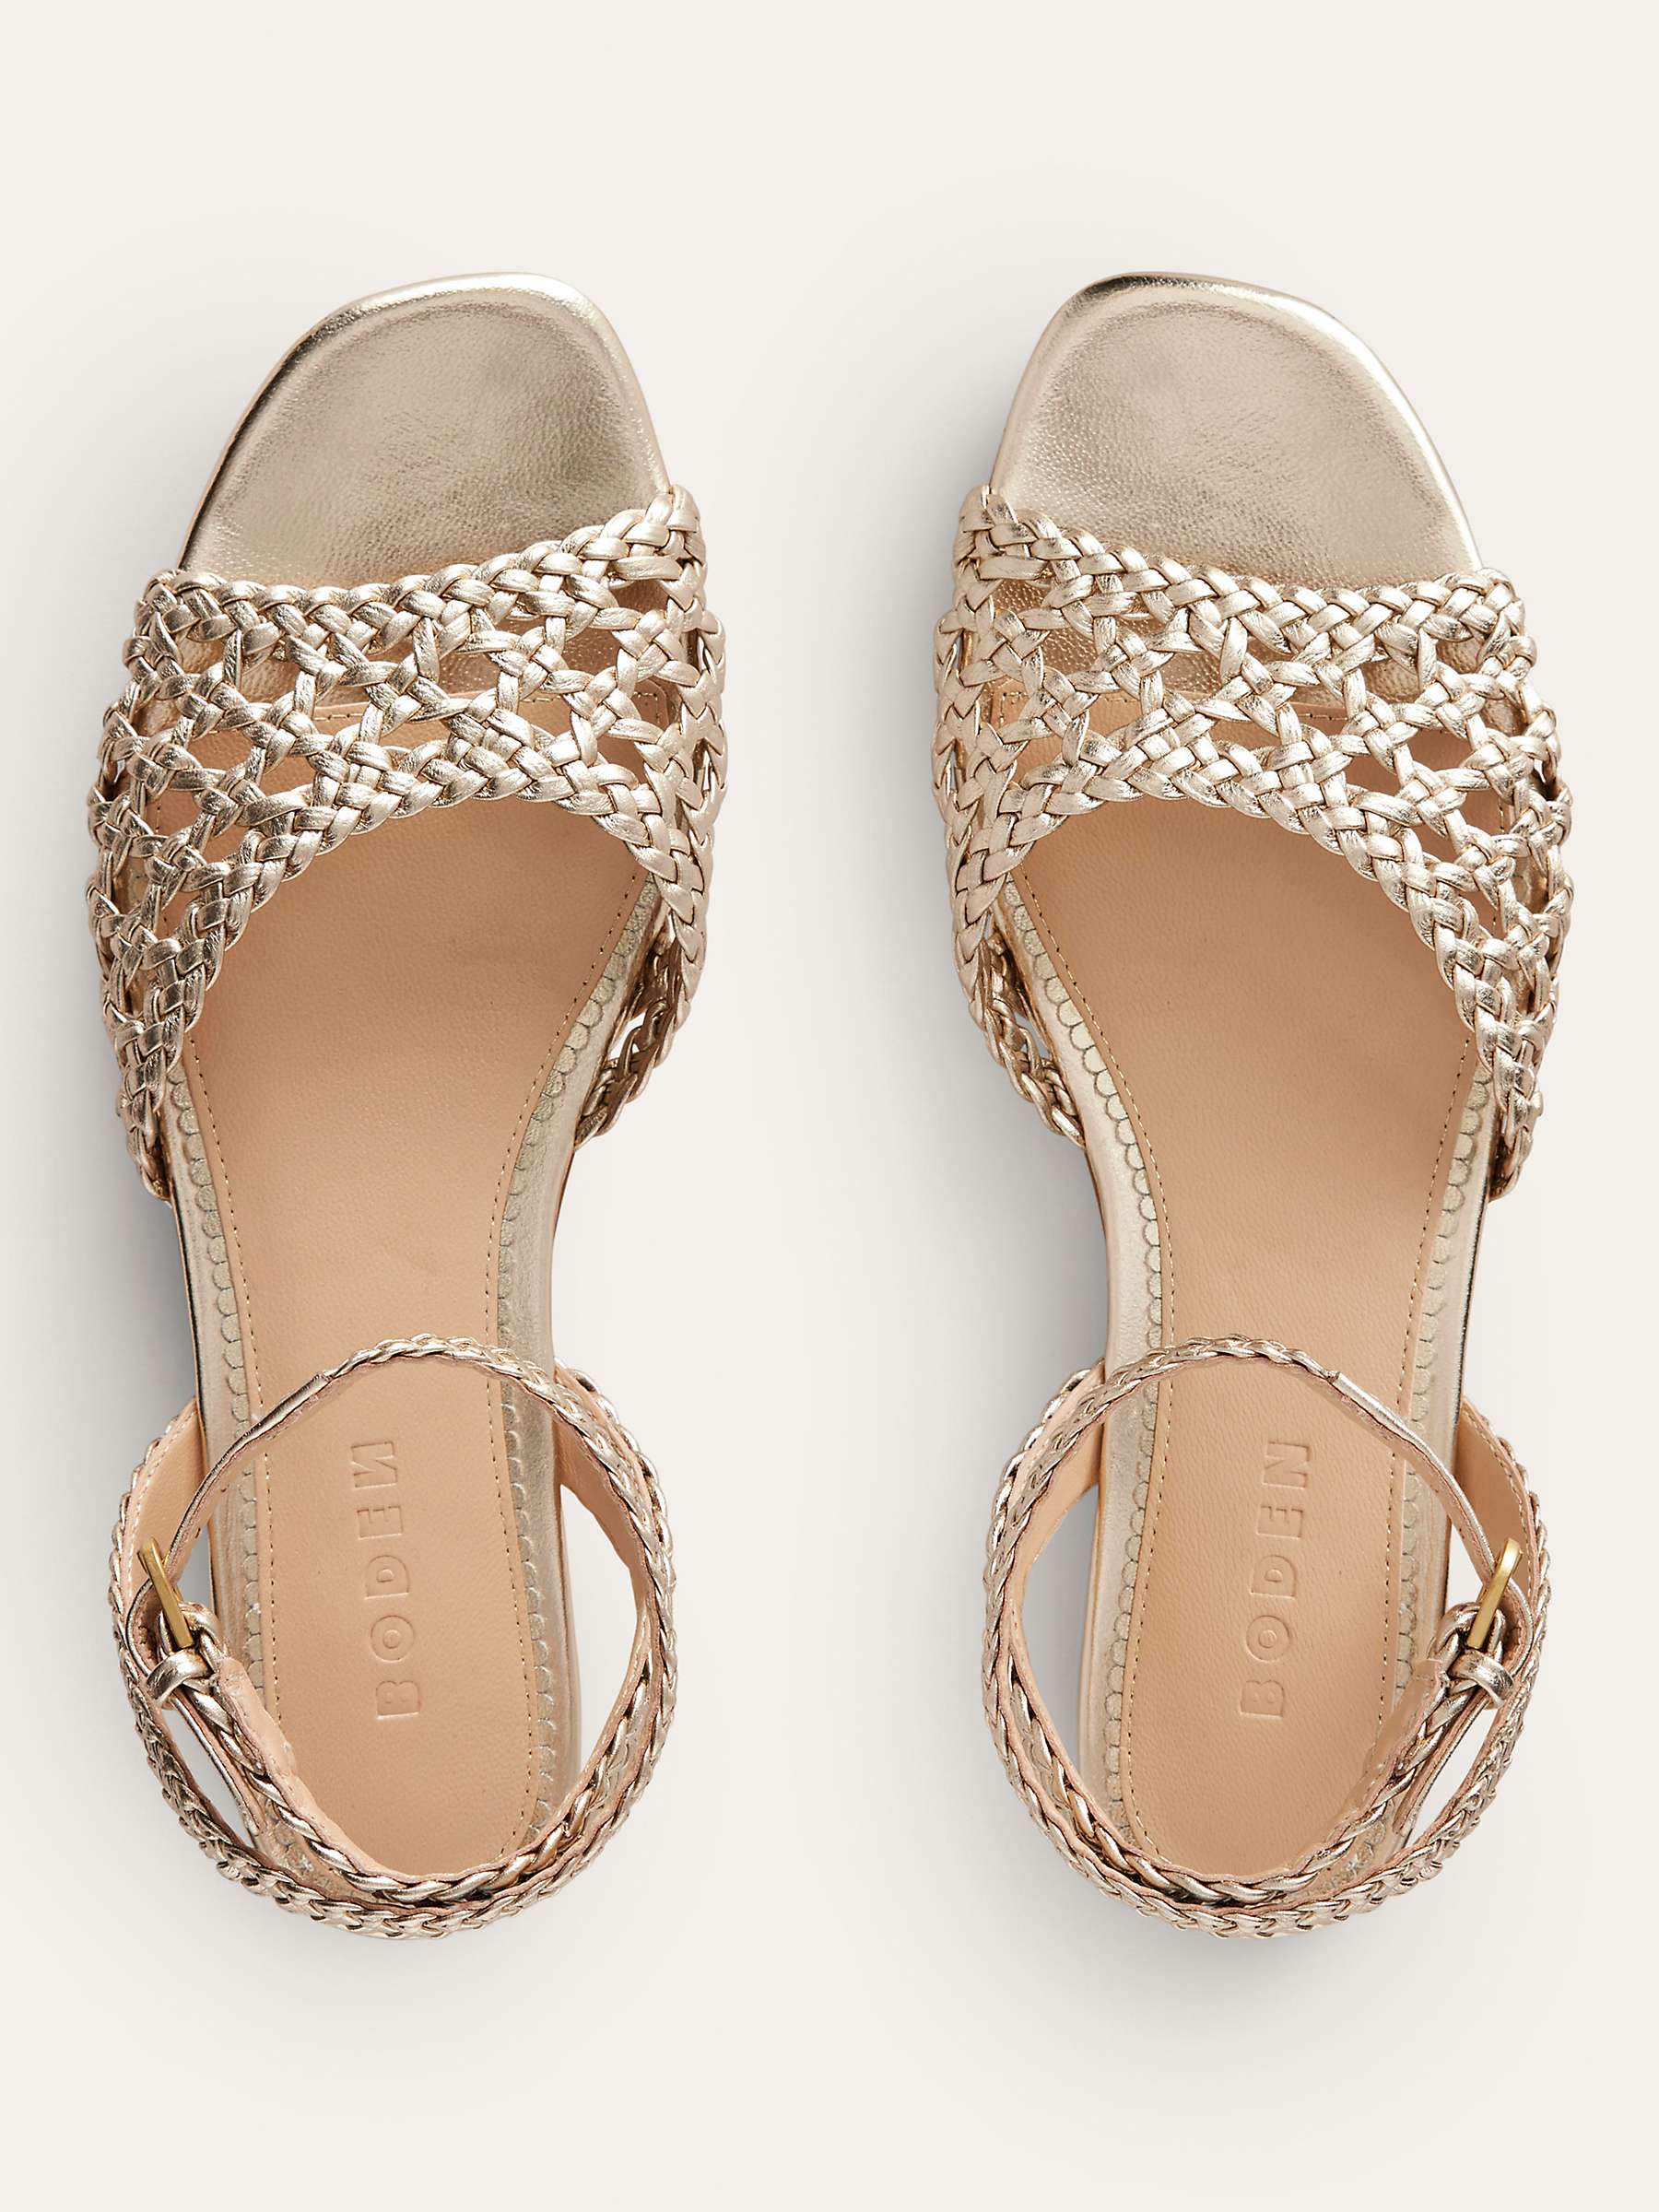 Buy Boden Woven Leather Flat Sandals, Gold Online at johnlewis.com